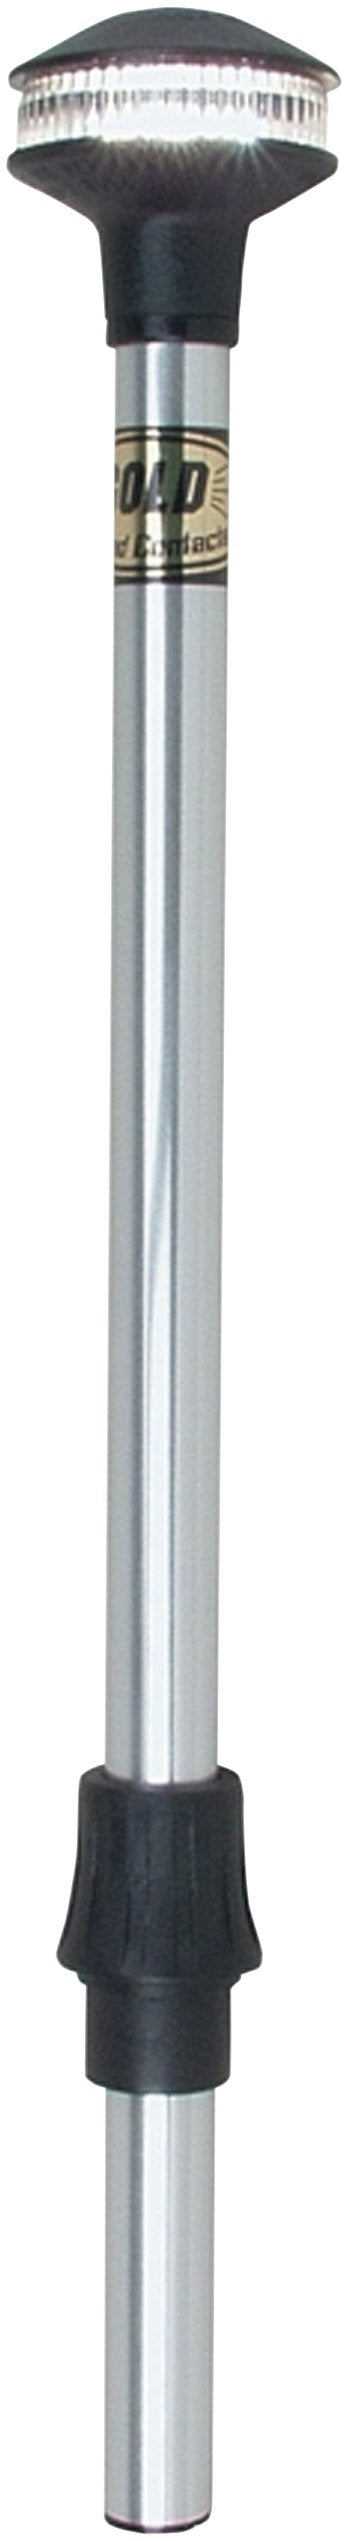 Perko All-Round Light Pole Only Reduced Glare 24" 1440-DP2-CHR